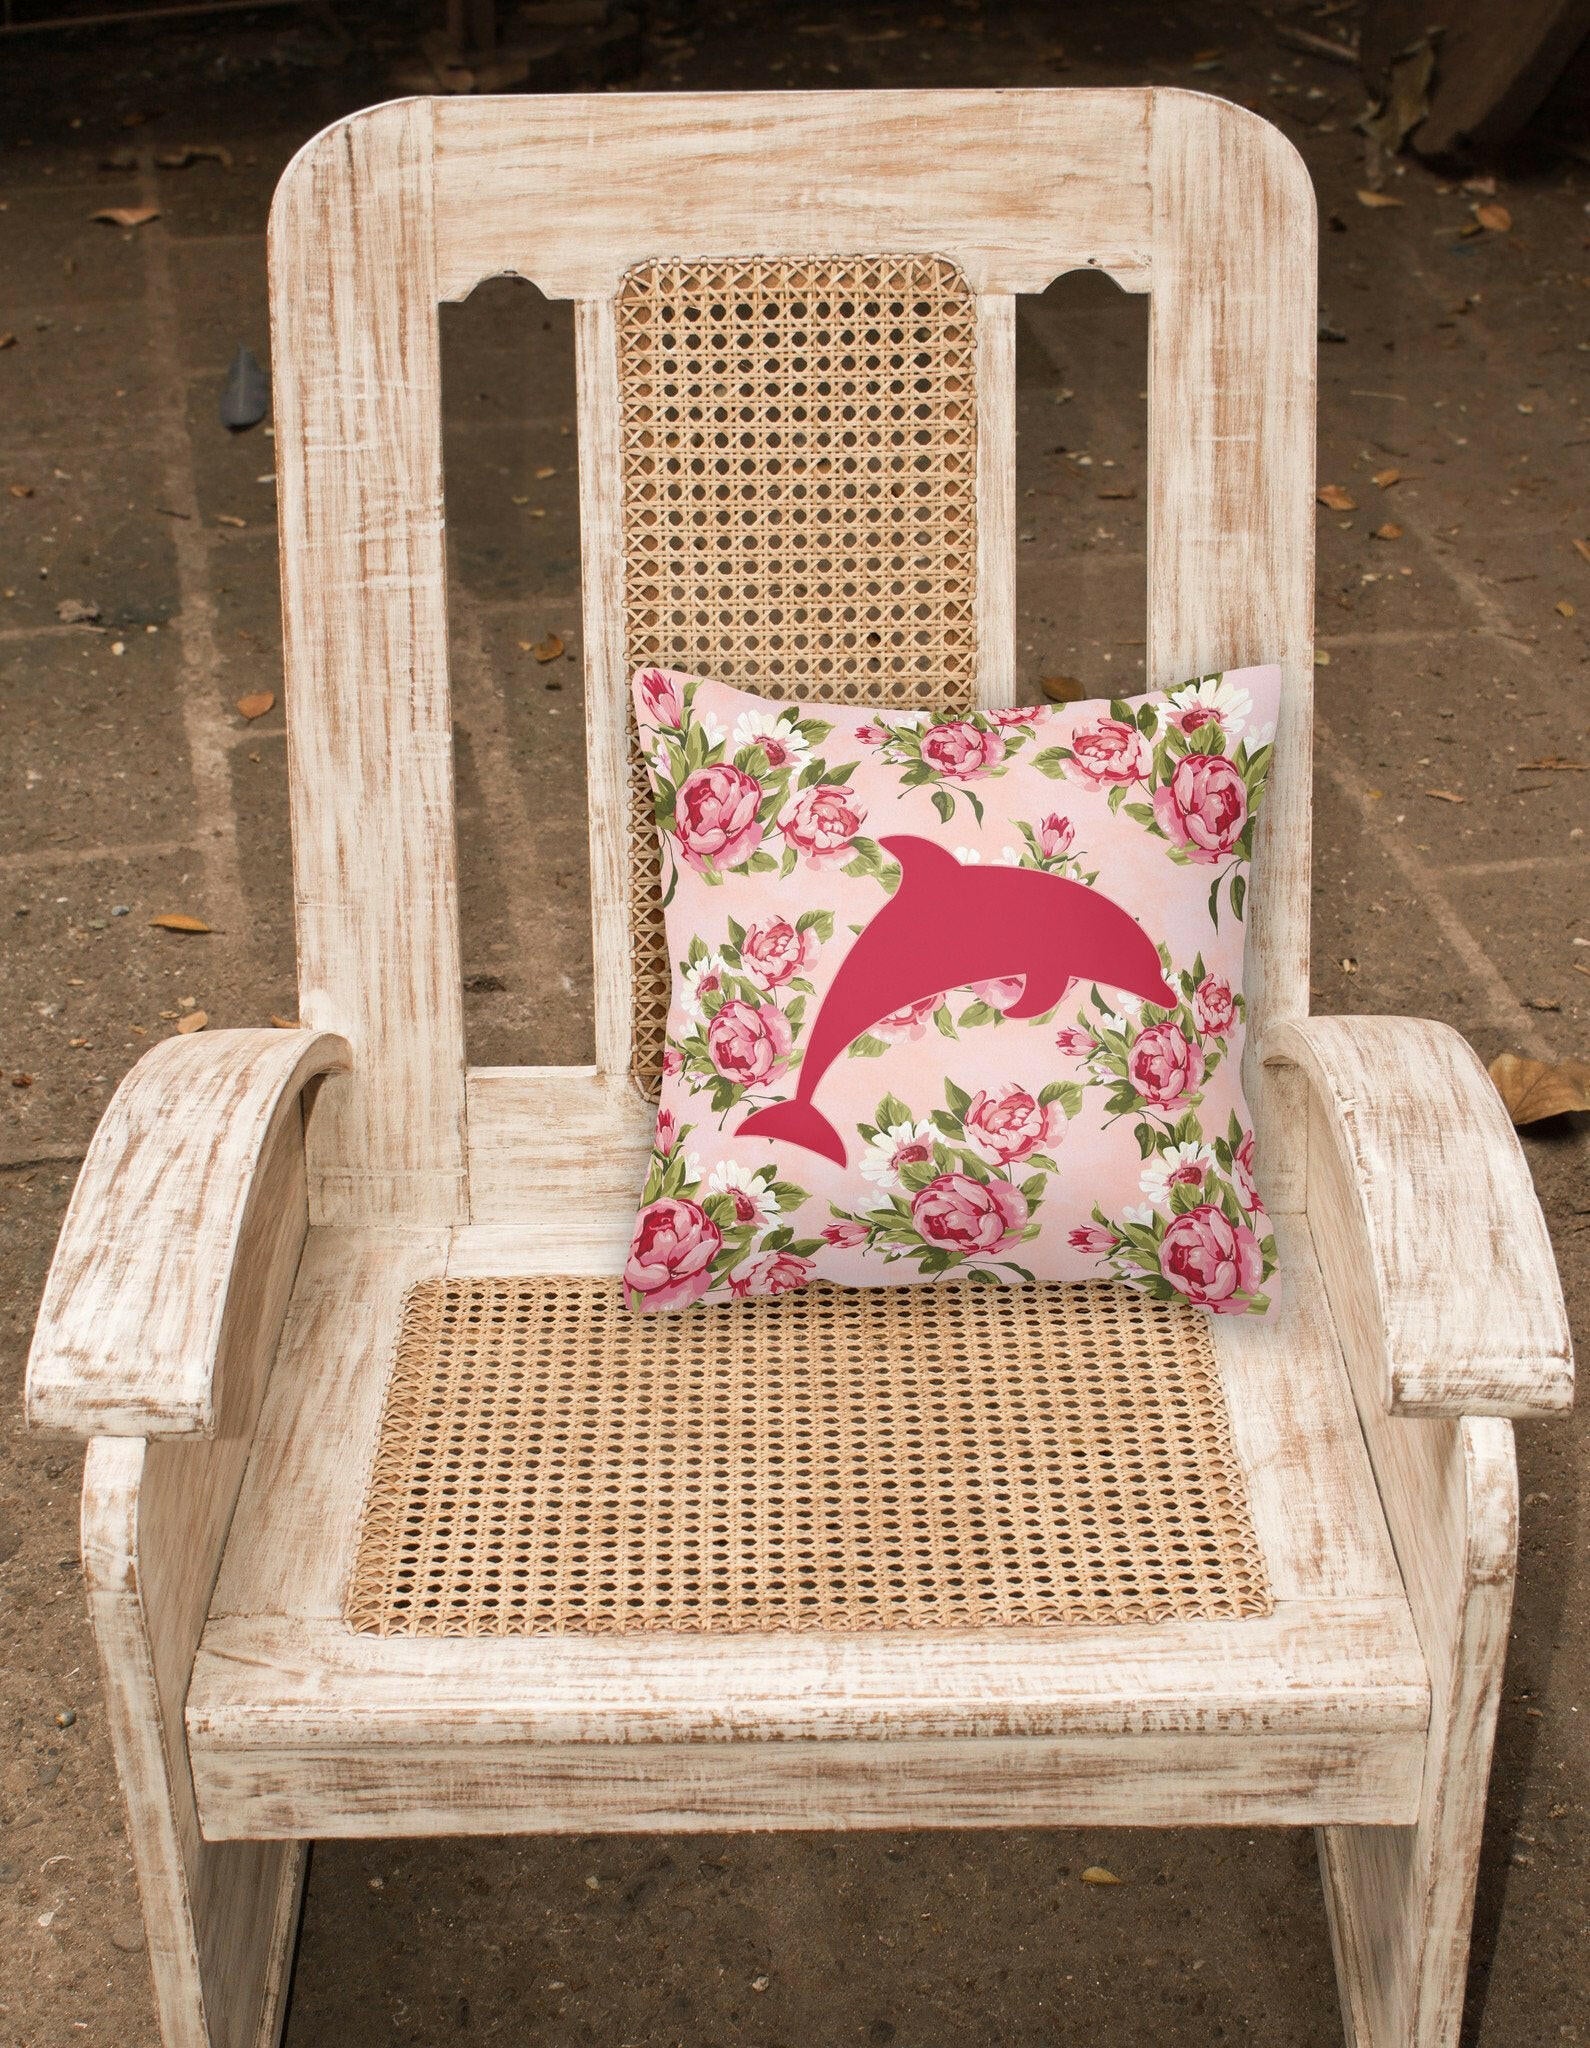 Dolphin Shabby Chic Pink Roses  Fabric Decorative Pillow BB1025-RS-PK-PW1414 - the-store.com